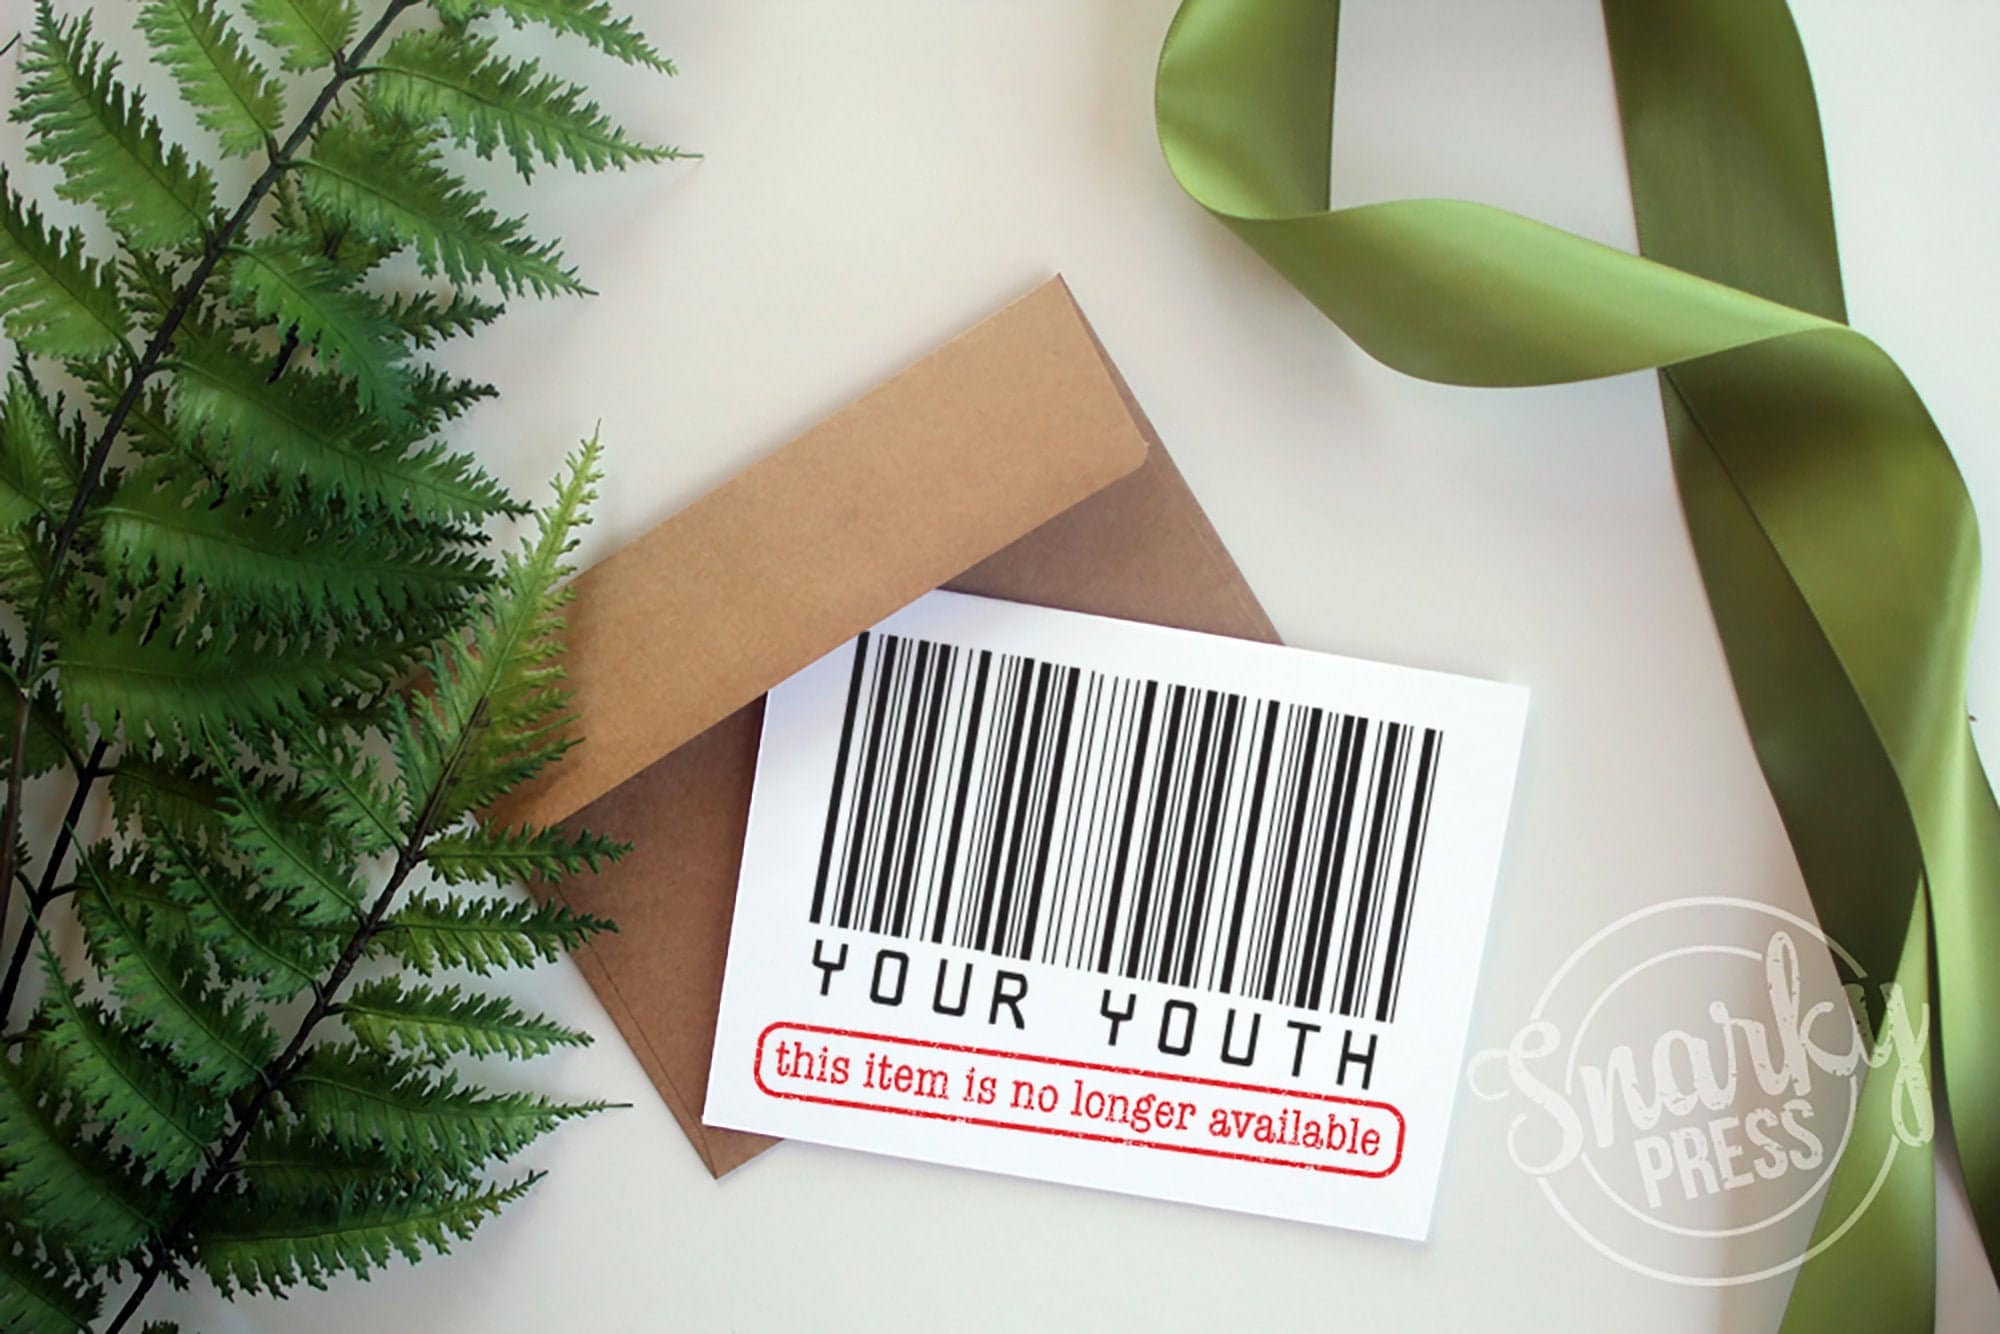 Your youth item expired funny birthday card